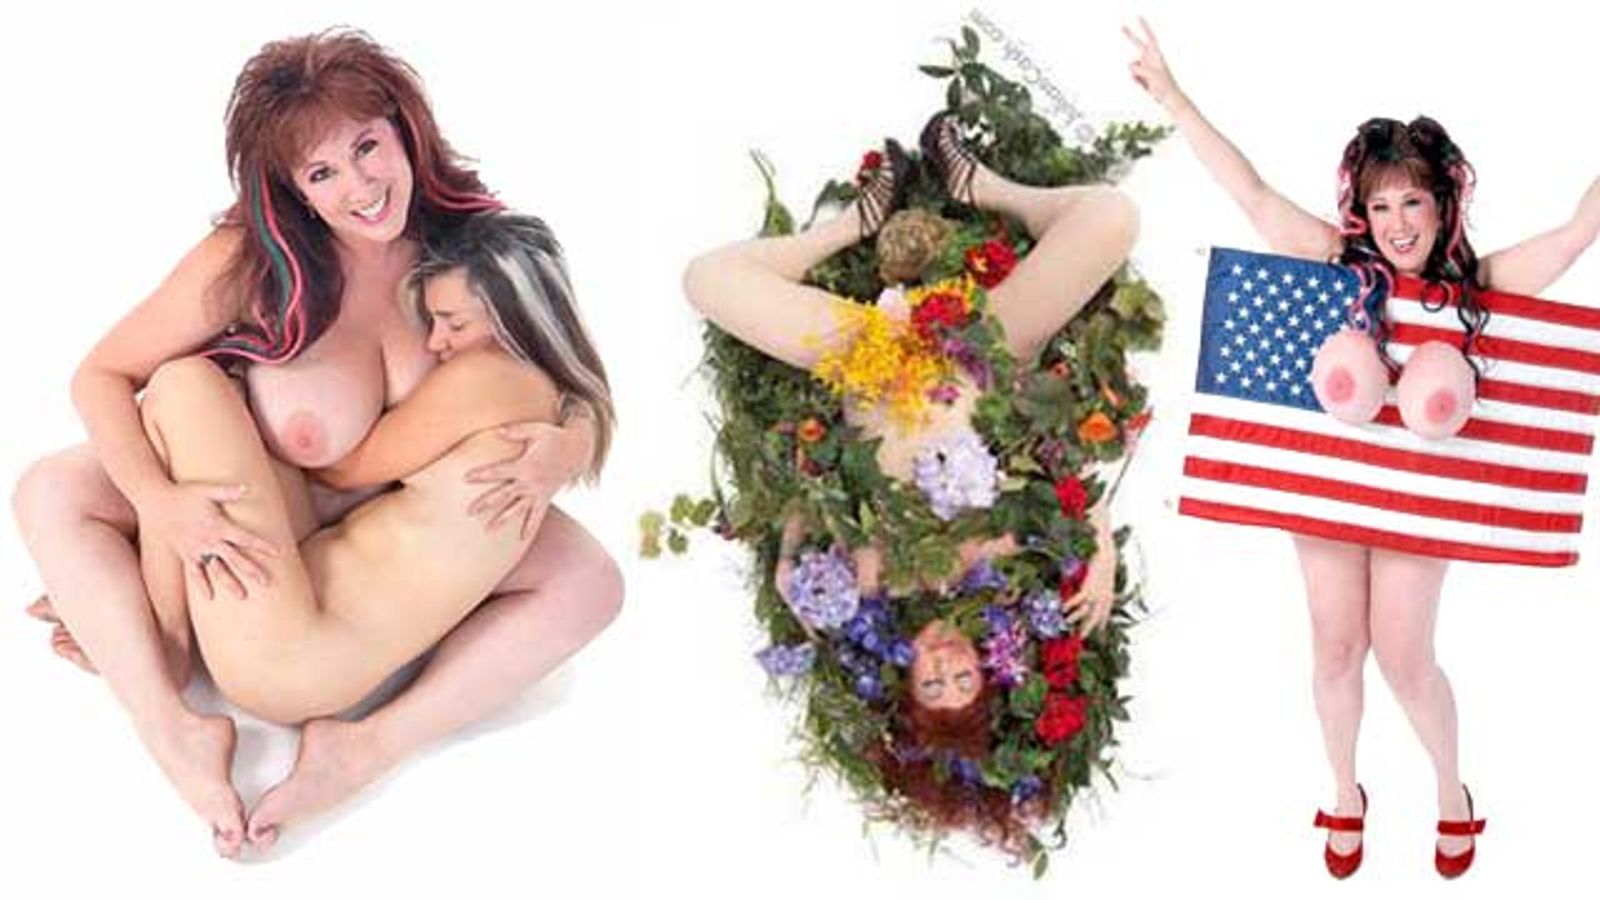 Why Not Join Annie Sprinkle's EcoSex Walking Tour?